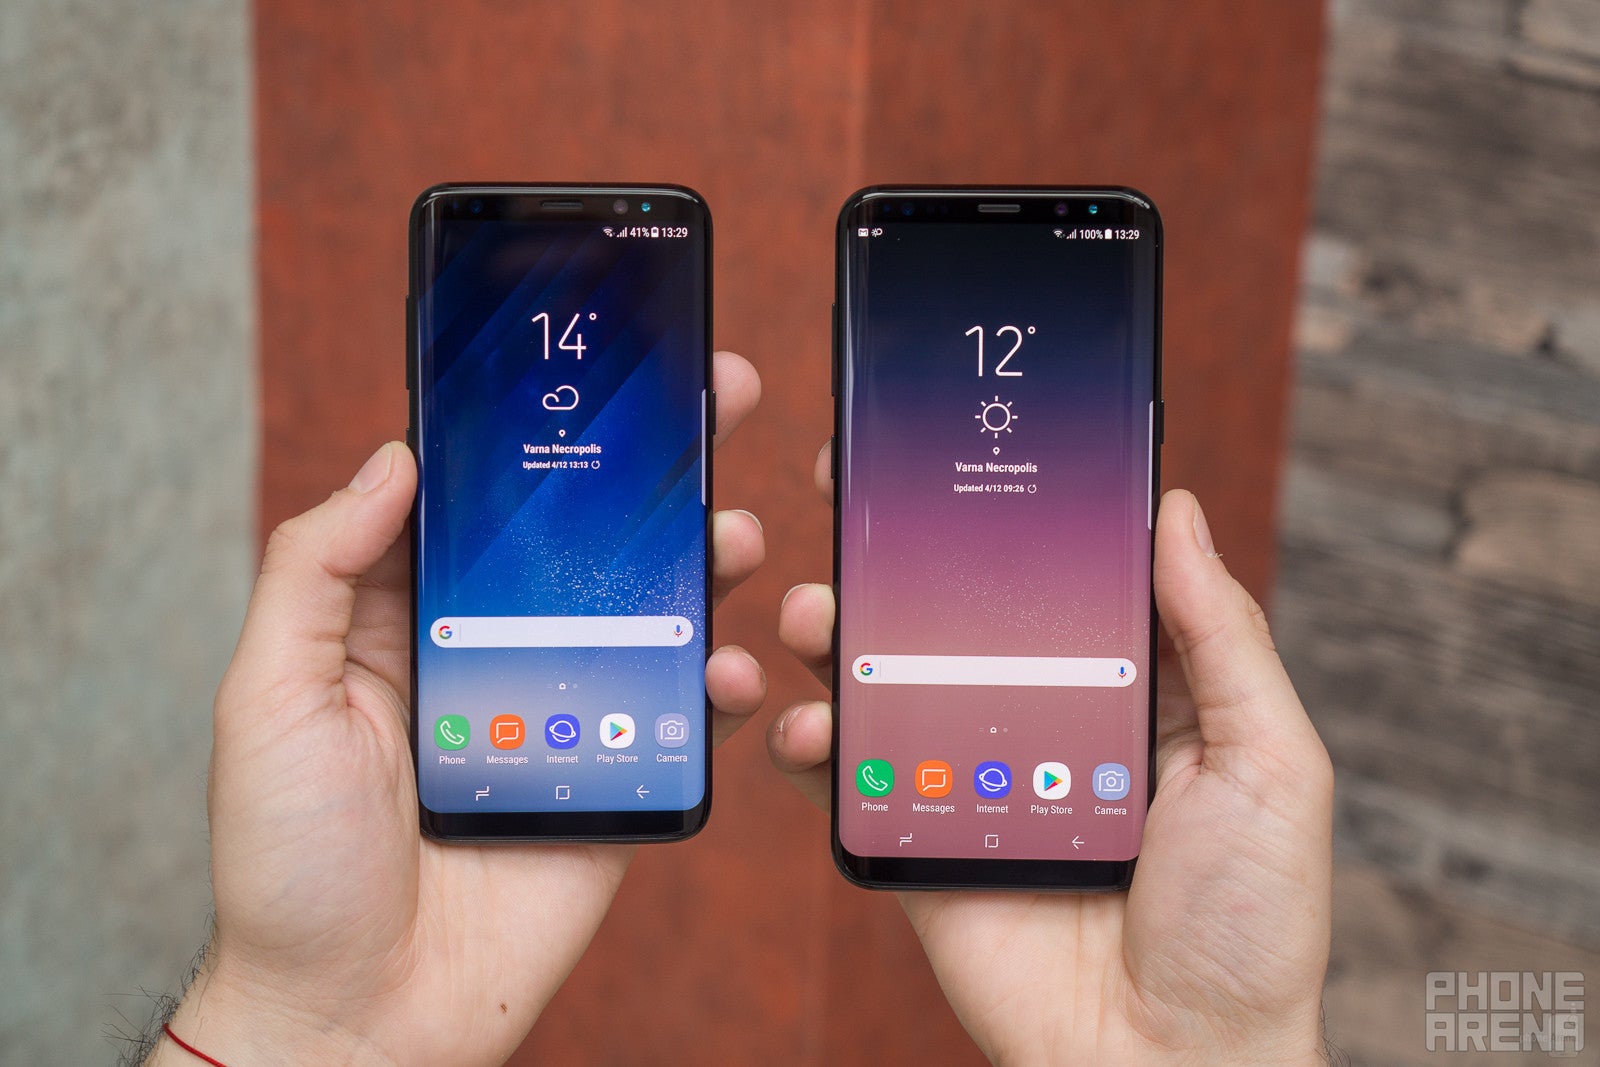 Galaxy S8 (left) vs Galaxy S8+ (right) - Samsung Galaxy S8 and S8+ Q&amp;A: Your questions answered